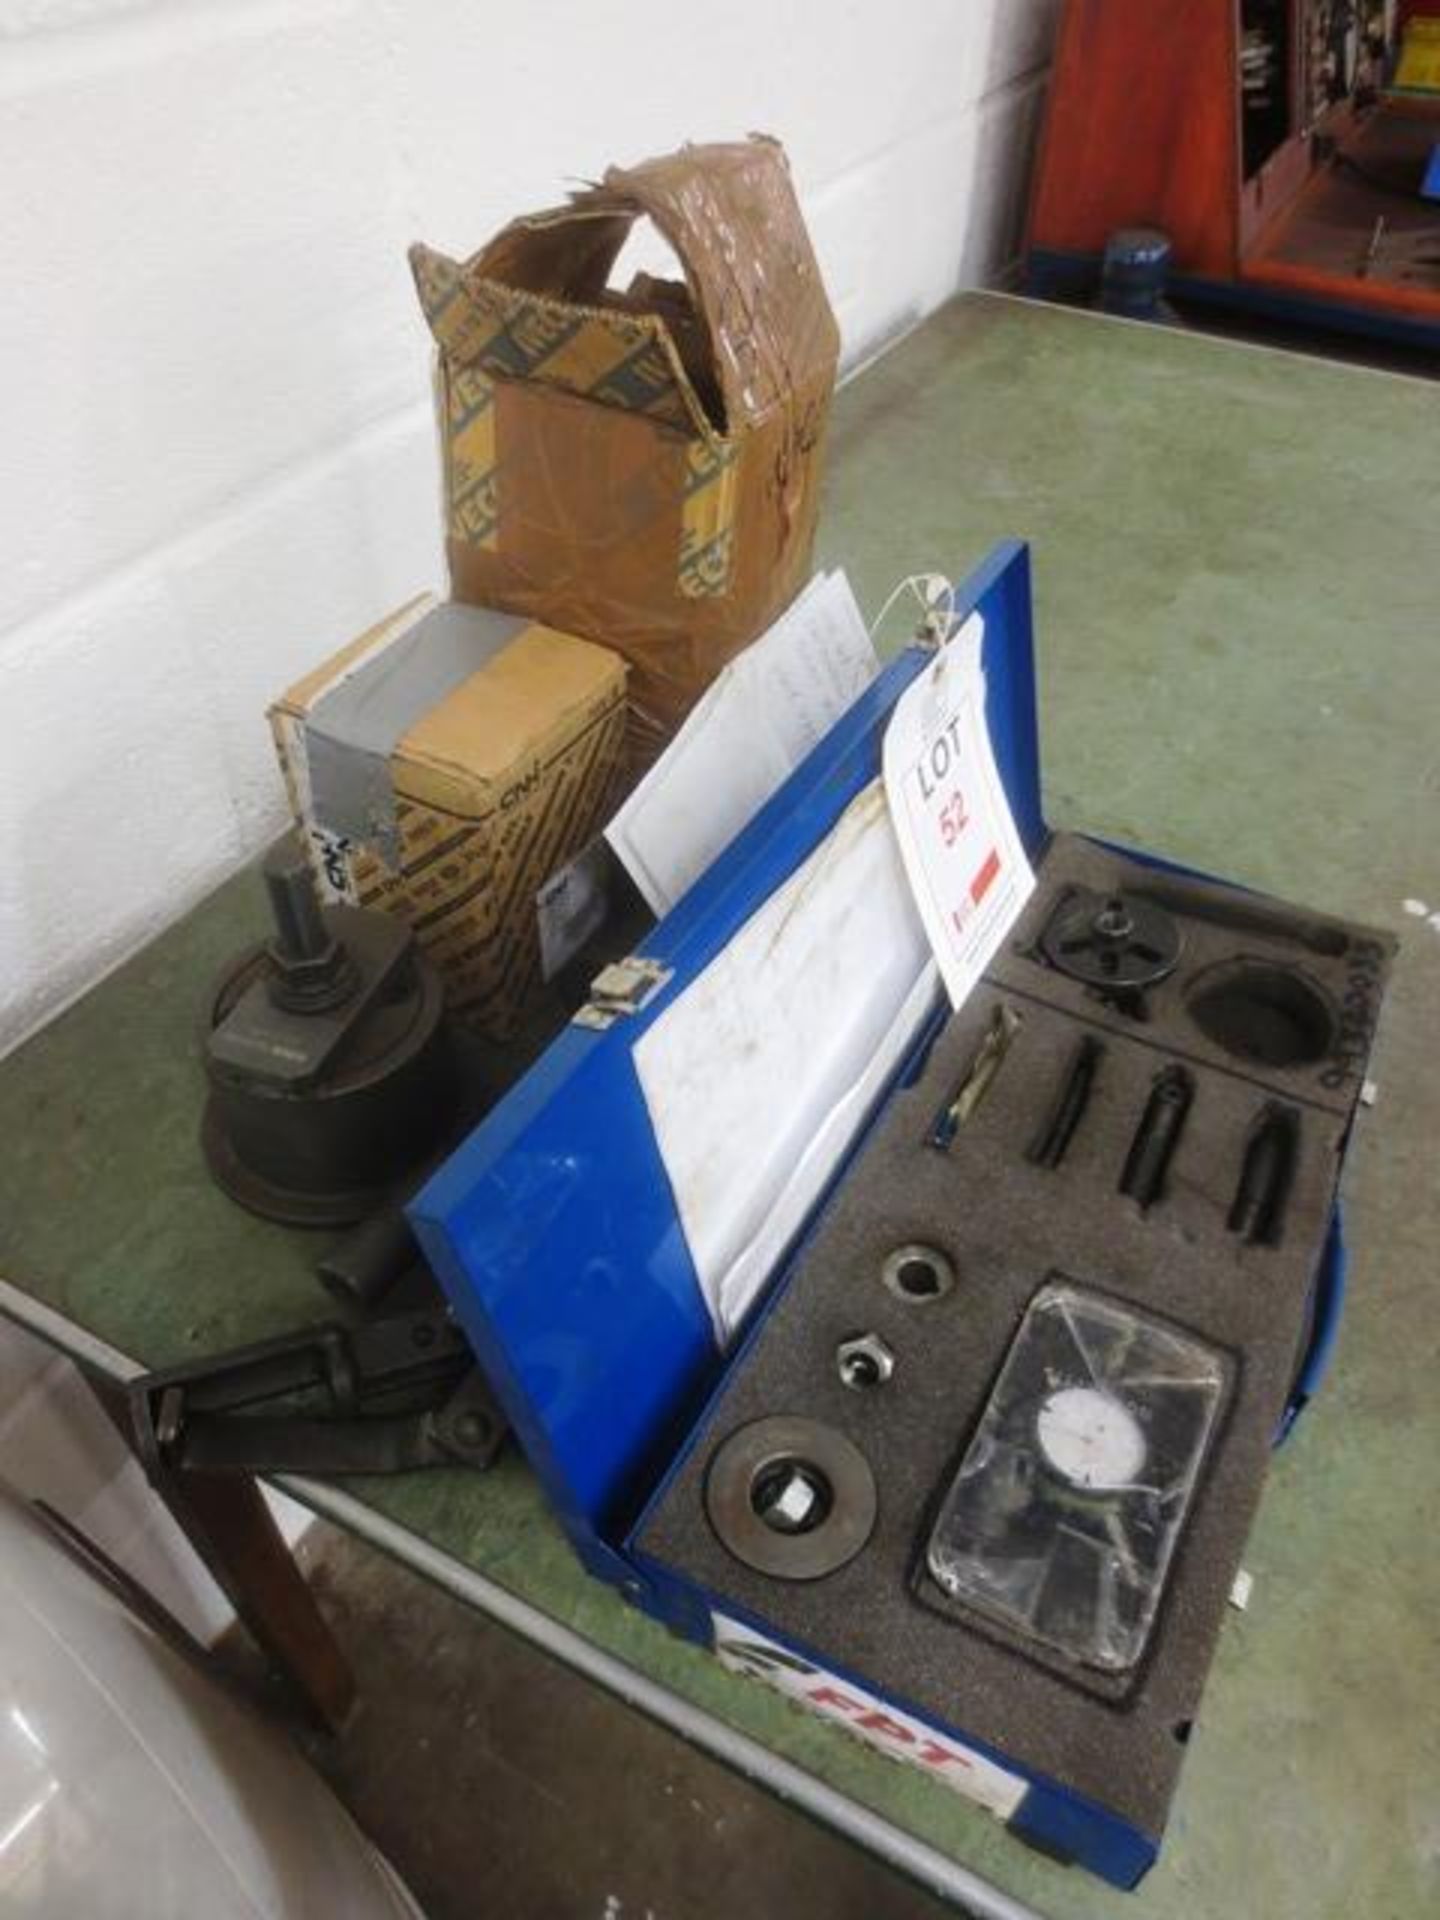 Iveco FPT engine service kit (as lotted)